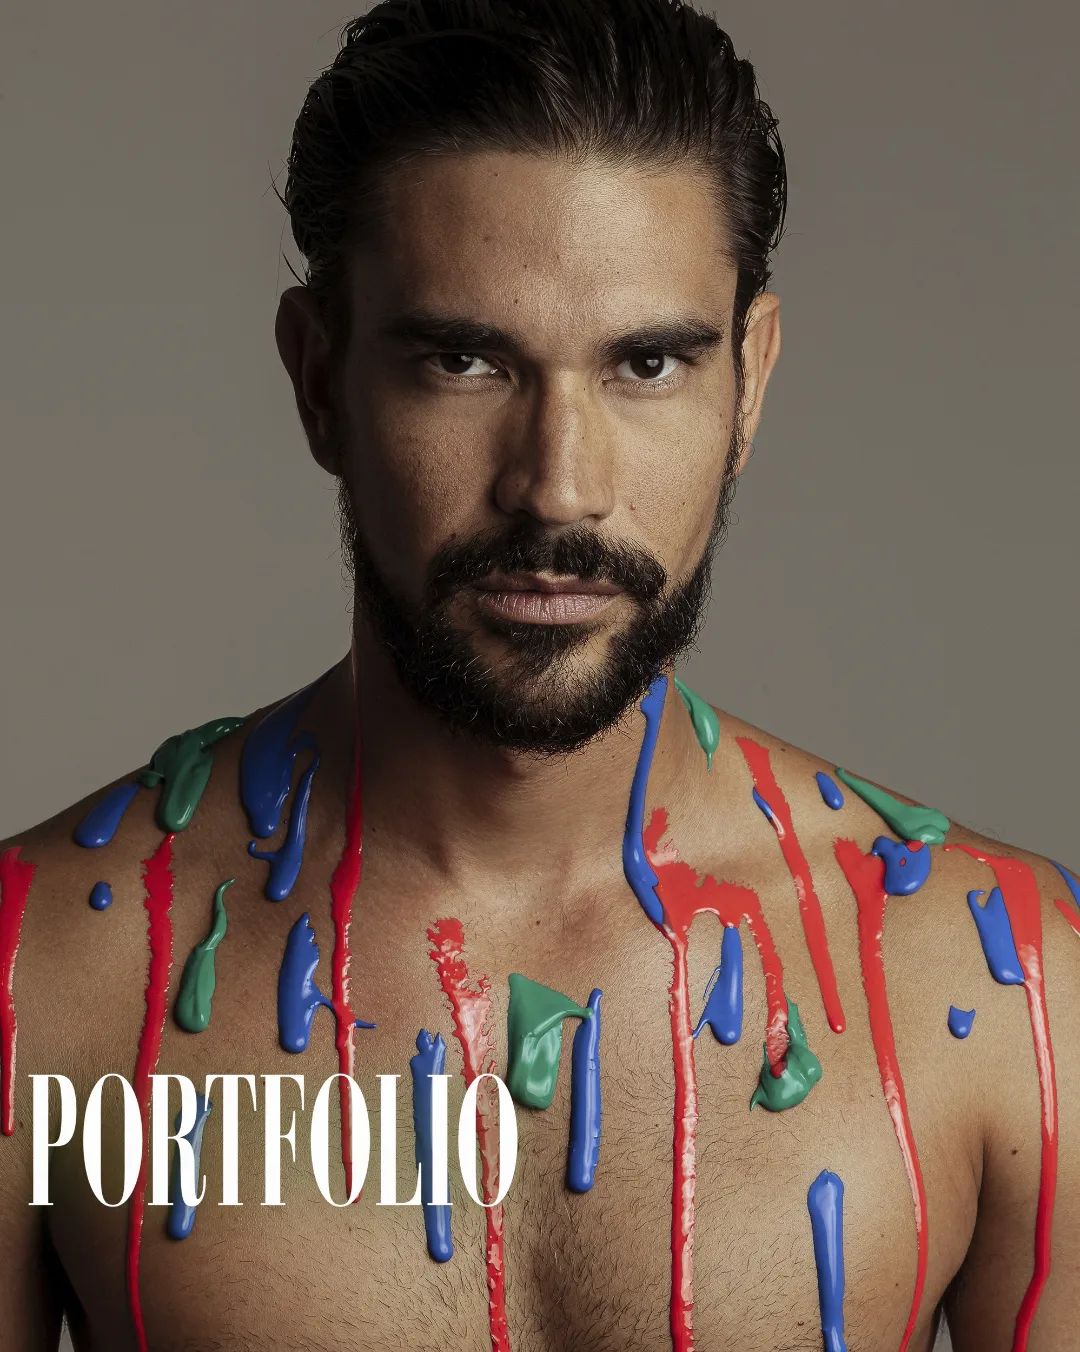 https://b.radikal.host/2023/04/06/Photo-by-REVISTA-PORTFOLIO-BRAZIL-on-March-19-2023.-May-be-a-closeup-of-1-person-beard-and-text..jpg